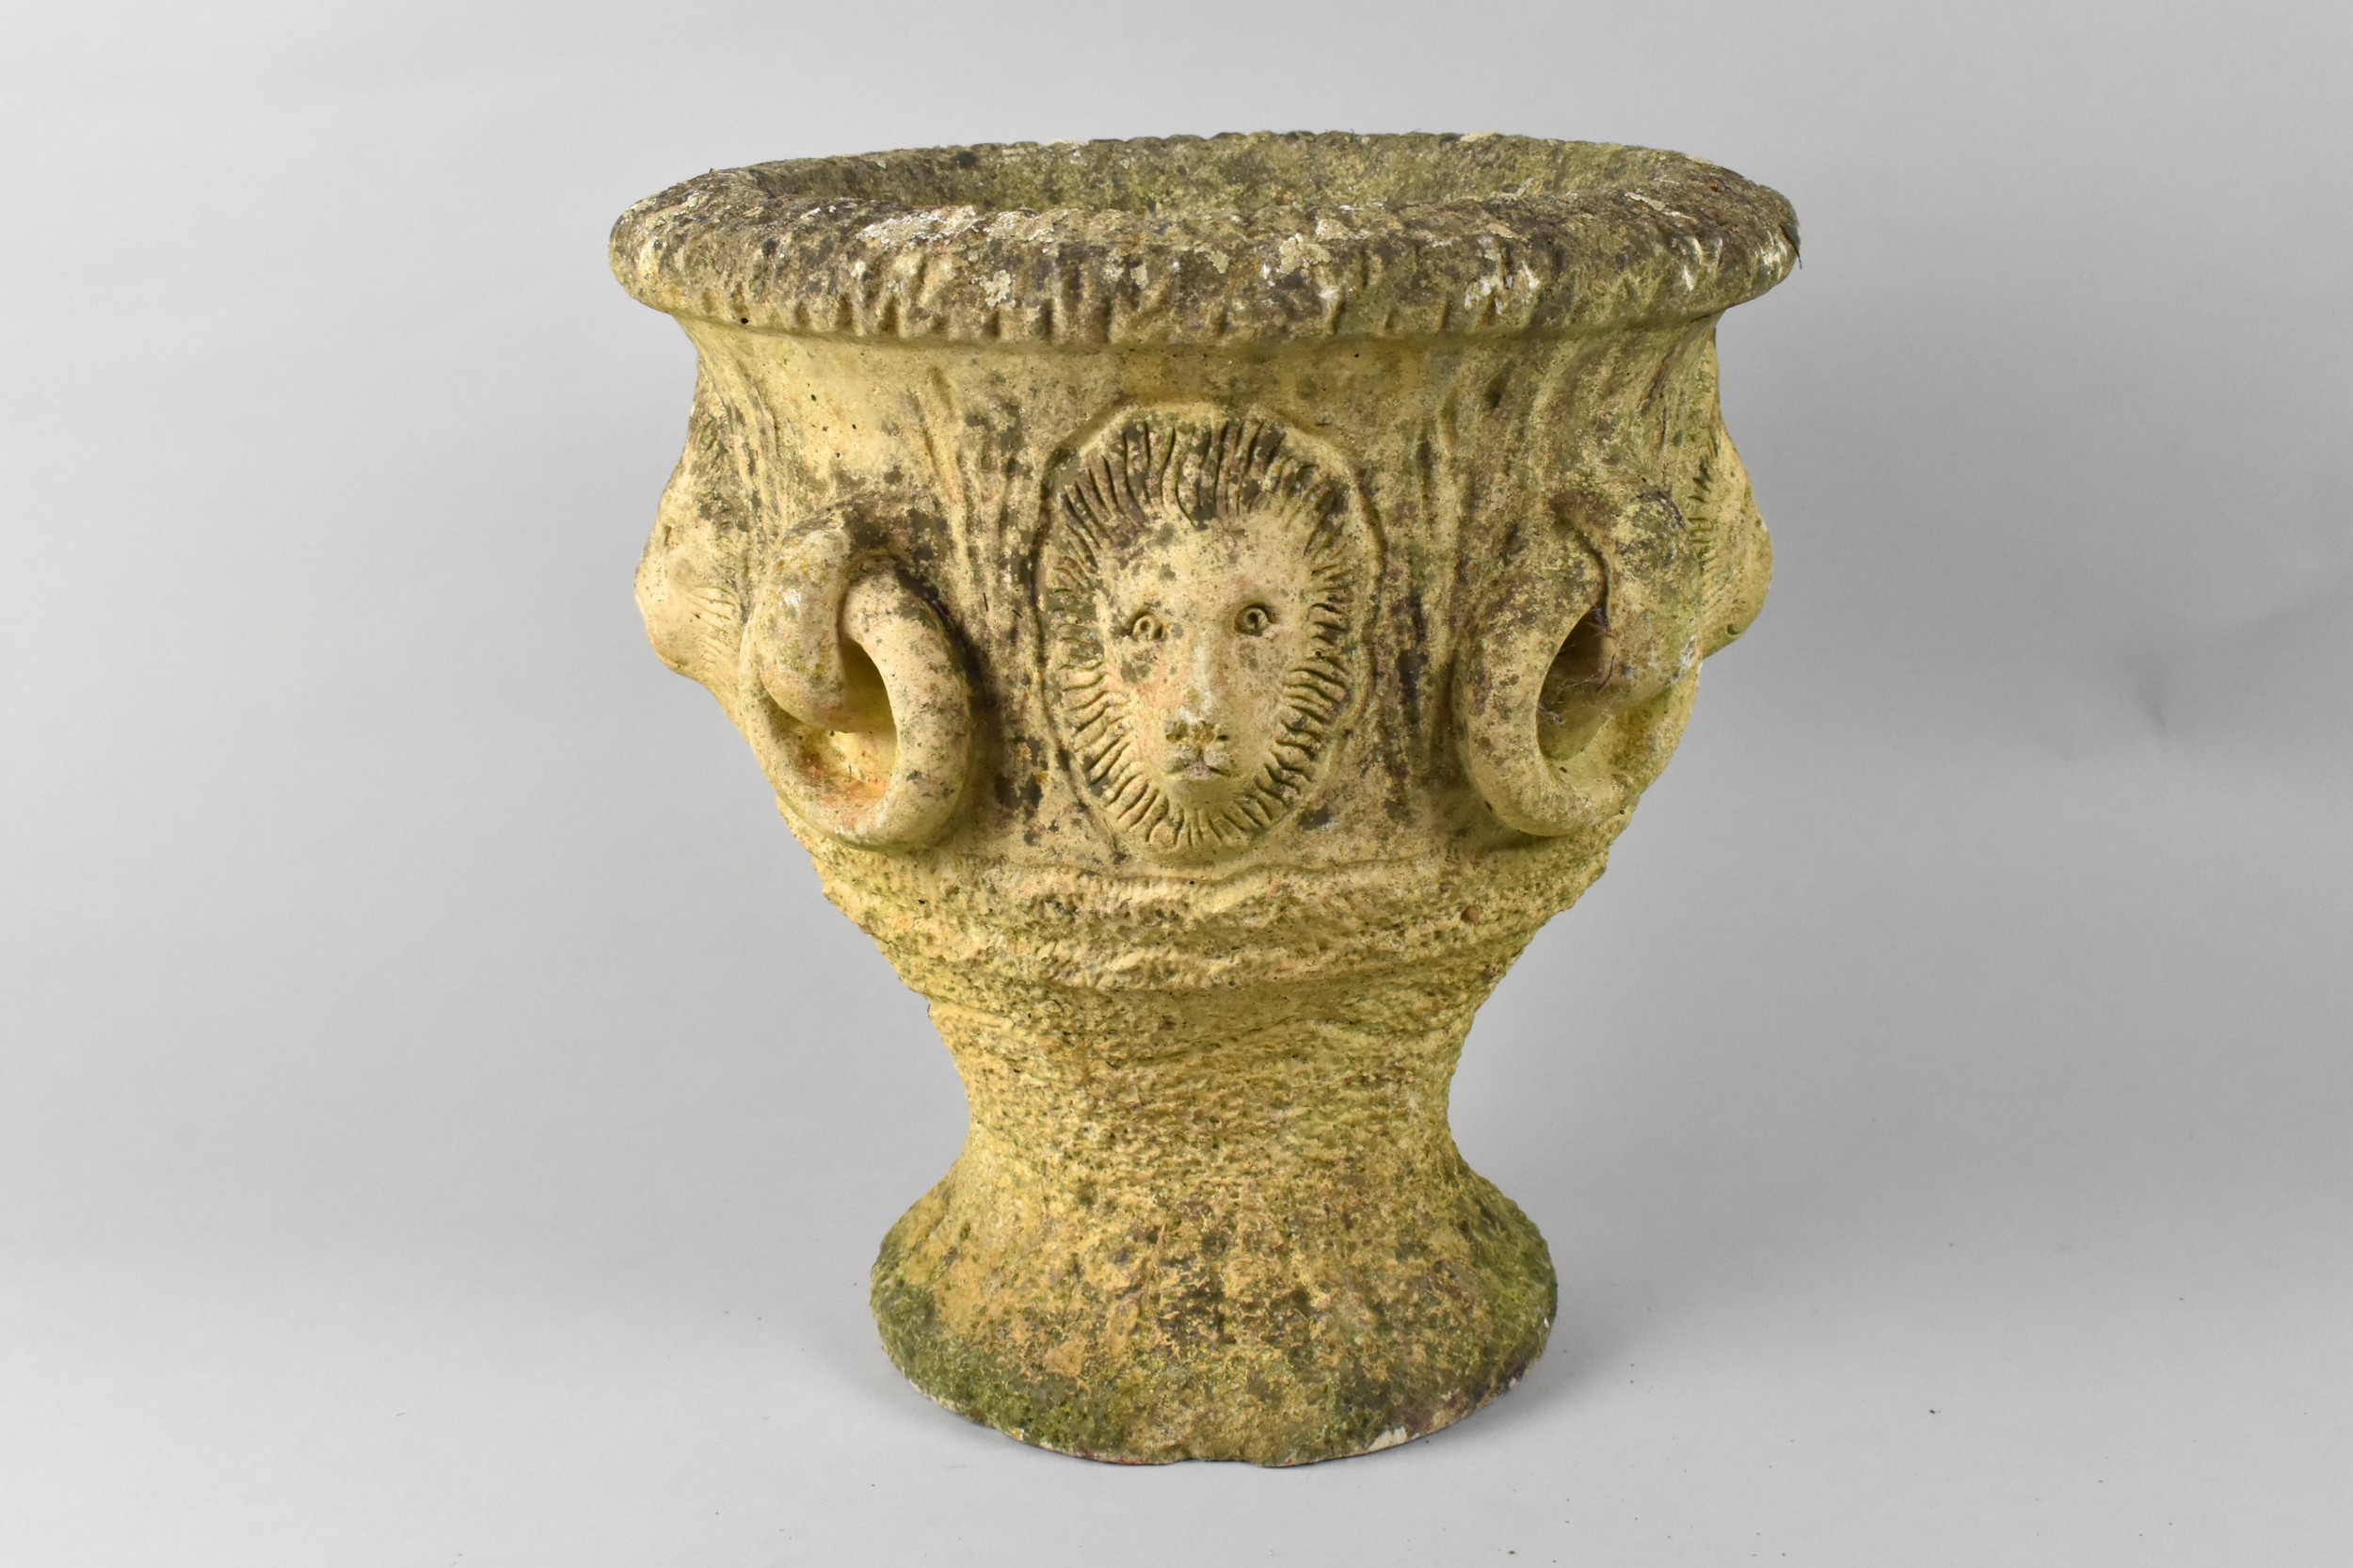 A Small Reconstituted Stone Garden Planter with Lion Head Relief Decoration, 27cms High